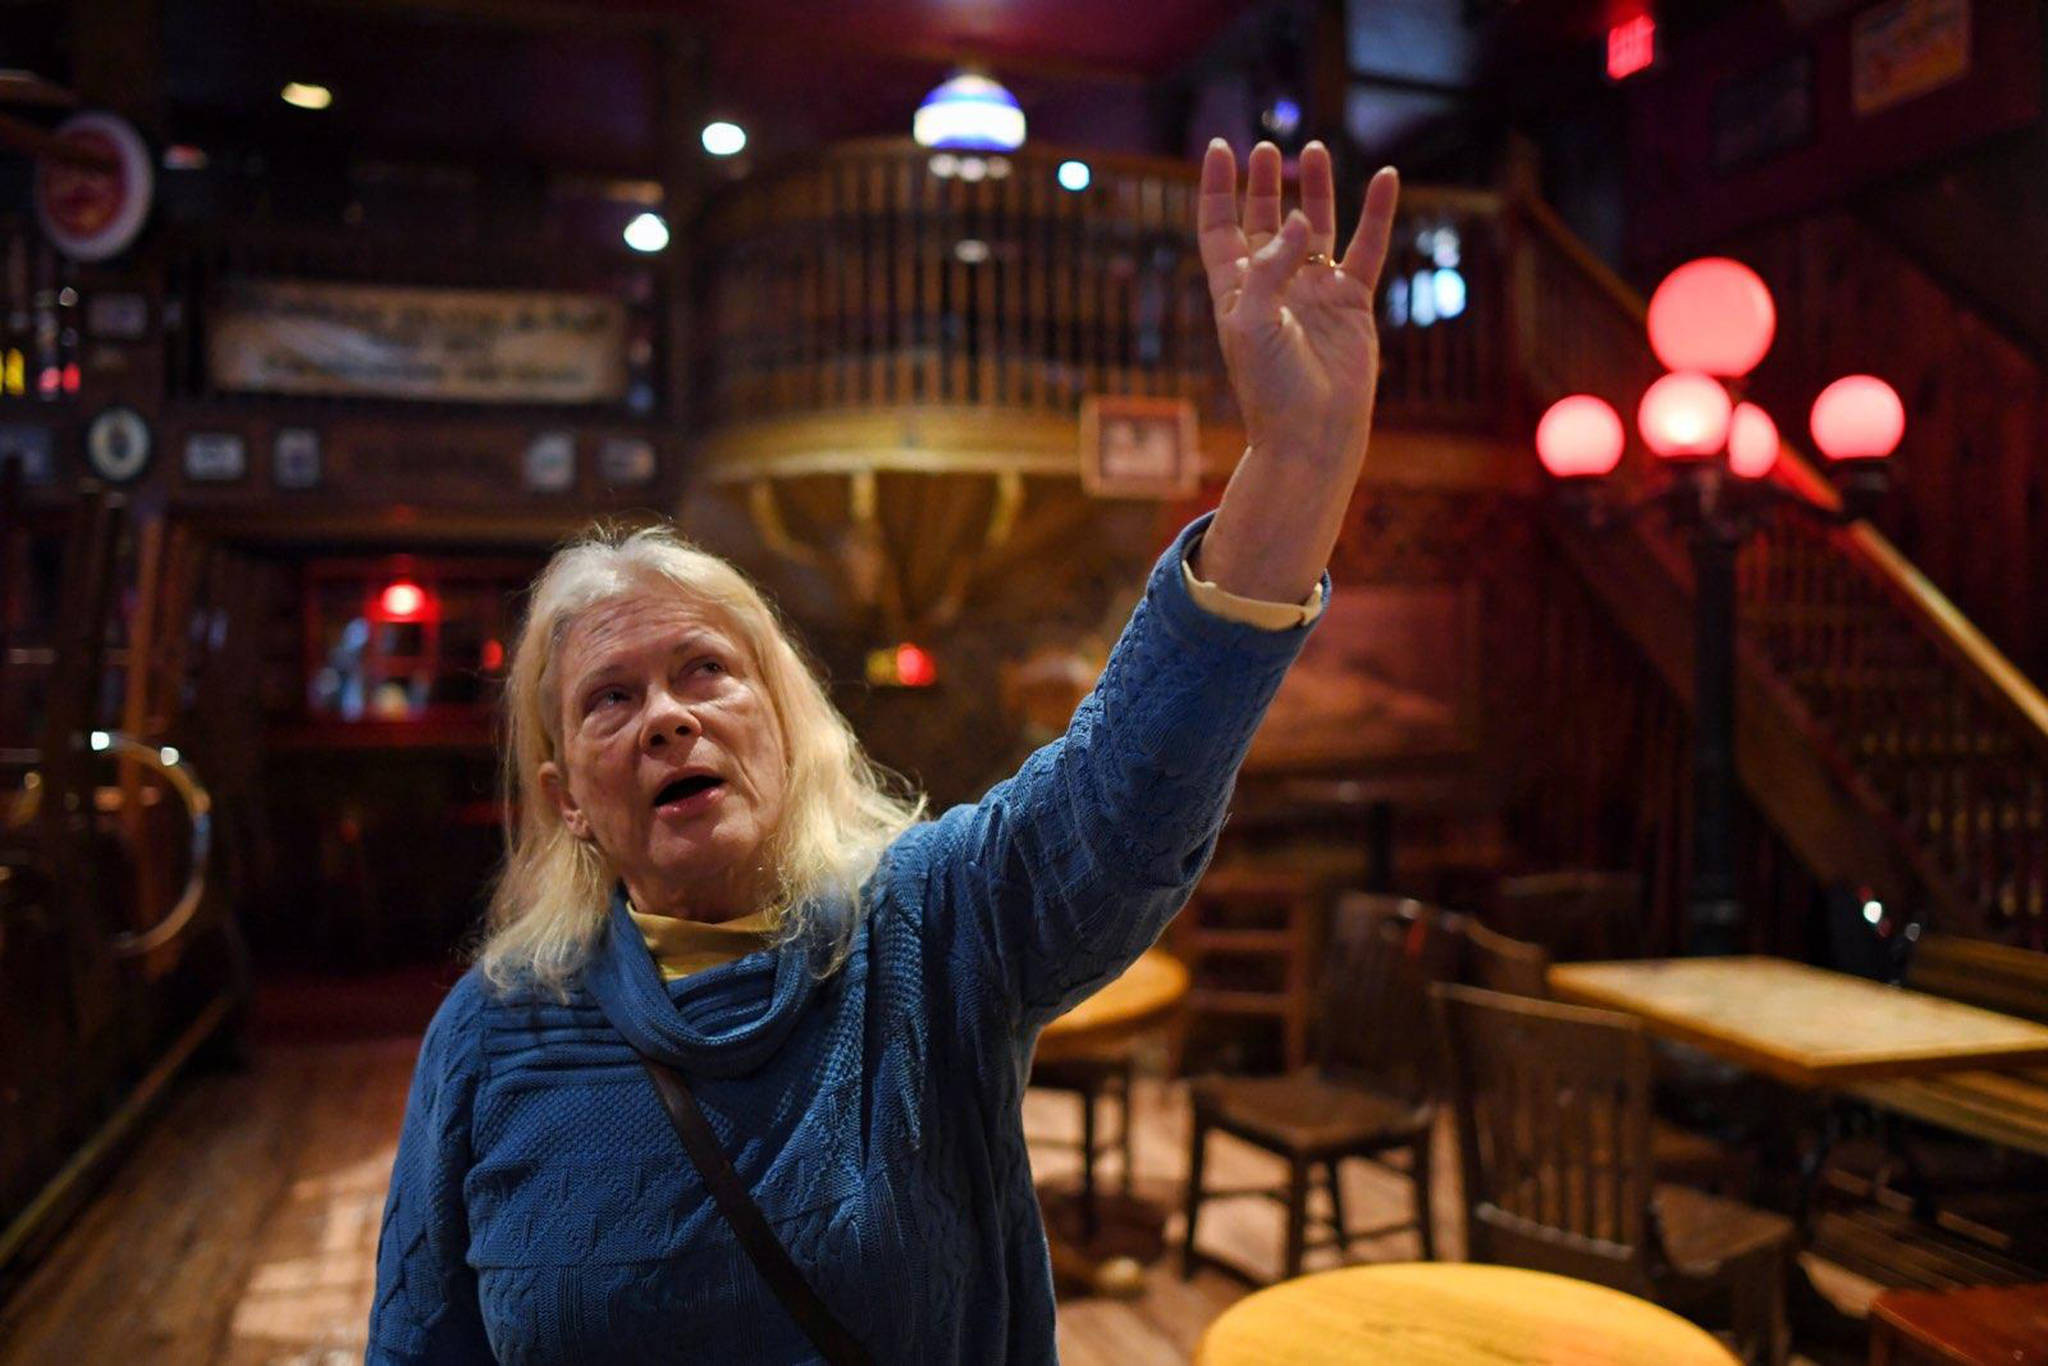 Bettye Adams, co-owner of the Alaskan Hotel & Bar, talks on Thursday, April 25, 2019, about a television show titled “Portals to Hell” on the Travel Channel featuring the hotel that will air Friday night. (Michael Penn | Juneau Empire)